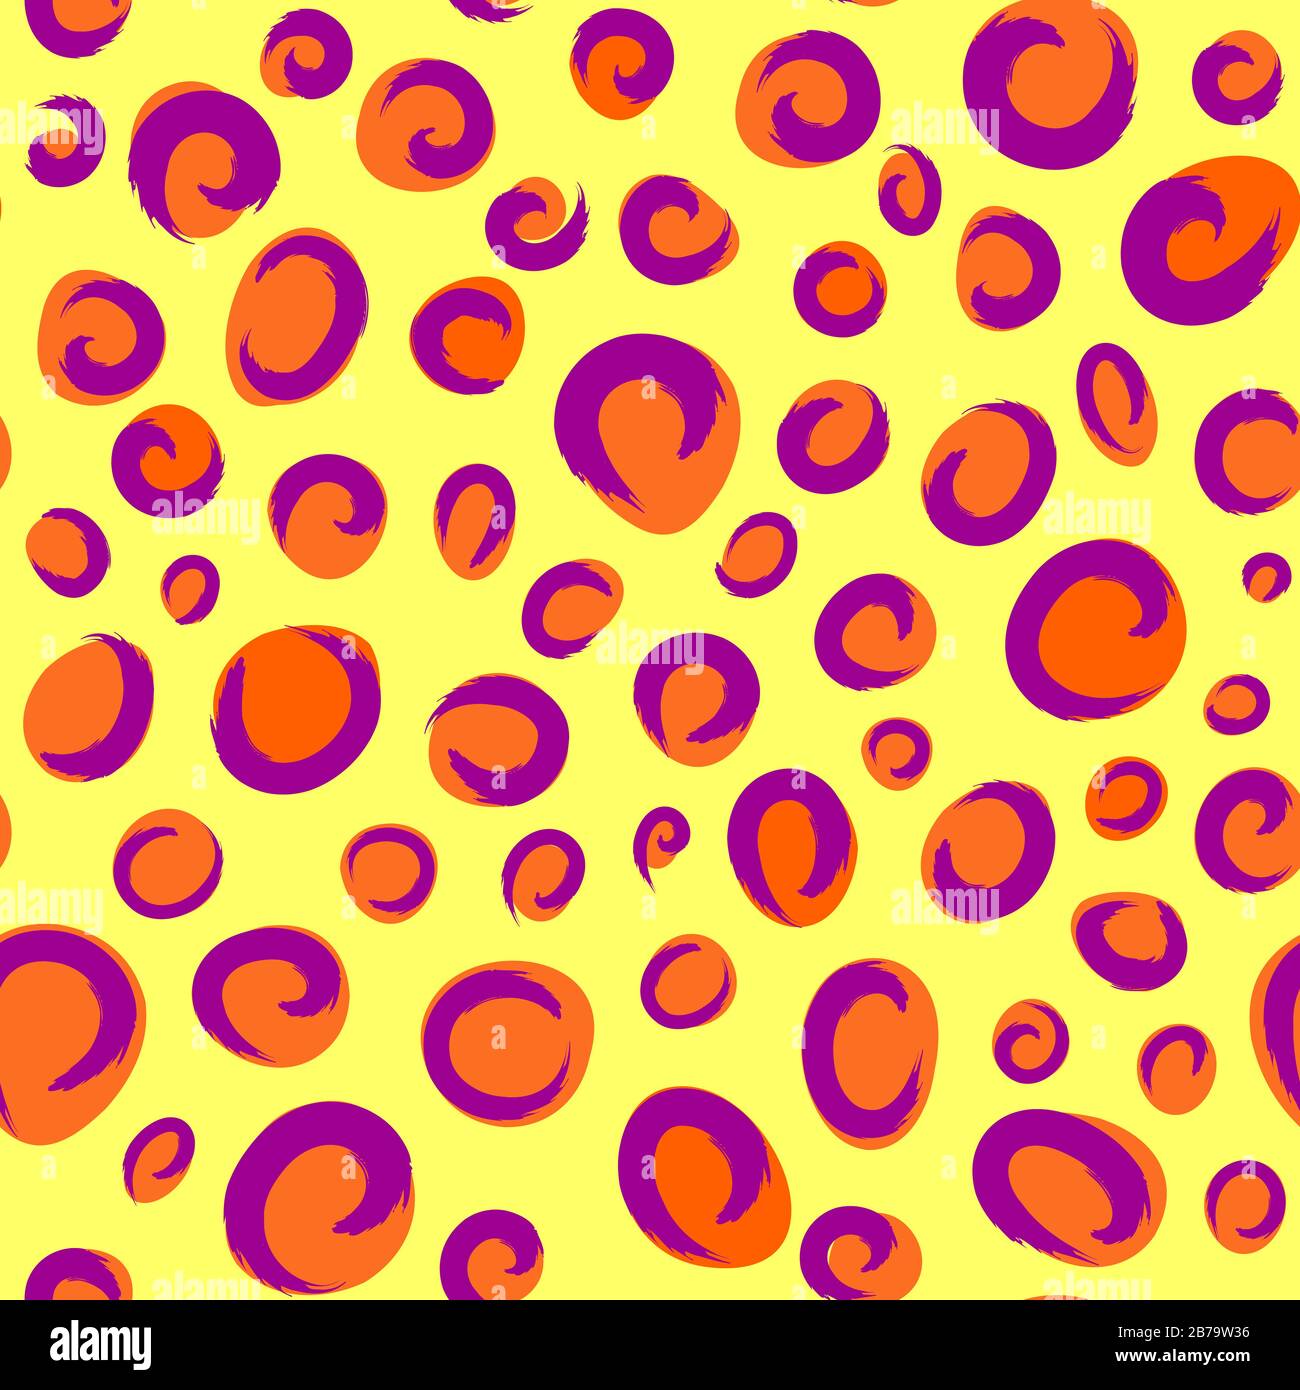 Animal inspired print neon orange spots and purple textured tails like elements on bright yellow contrasting background seamless surface pattern. Stock Vector